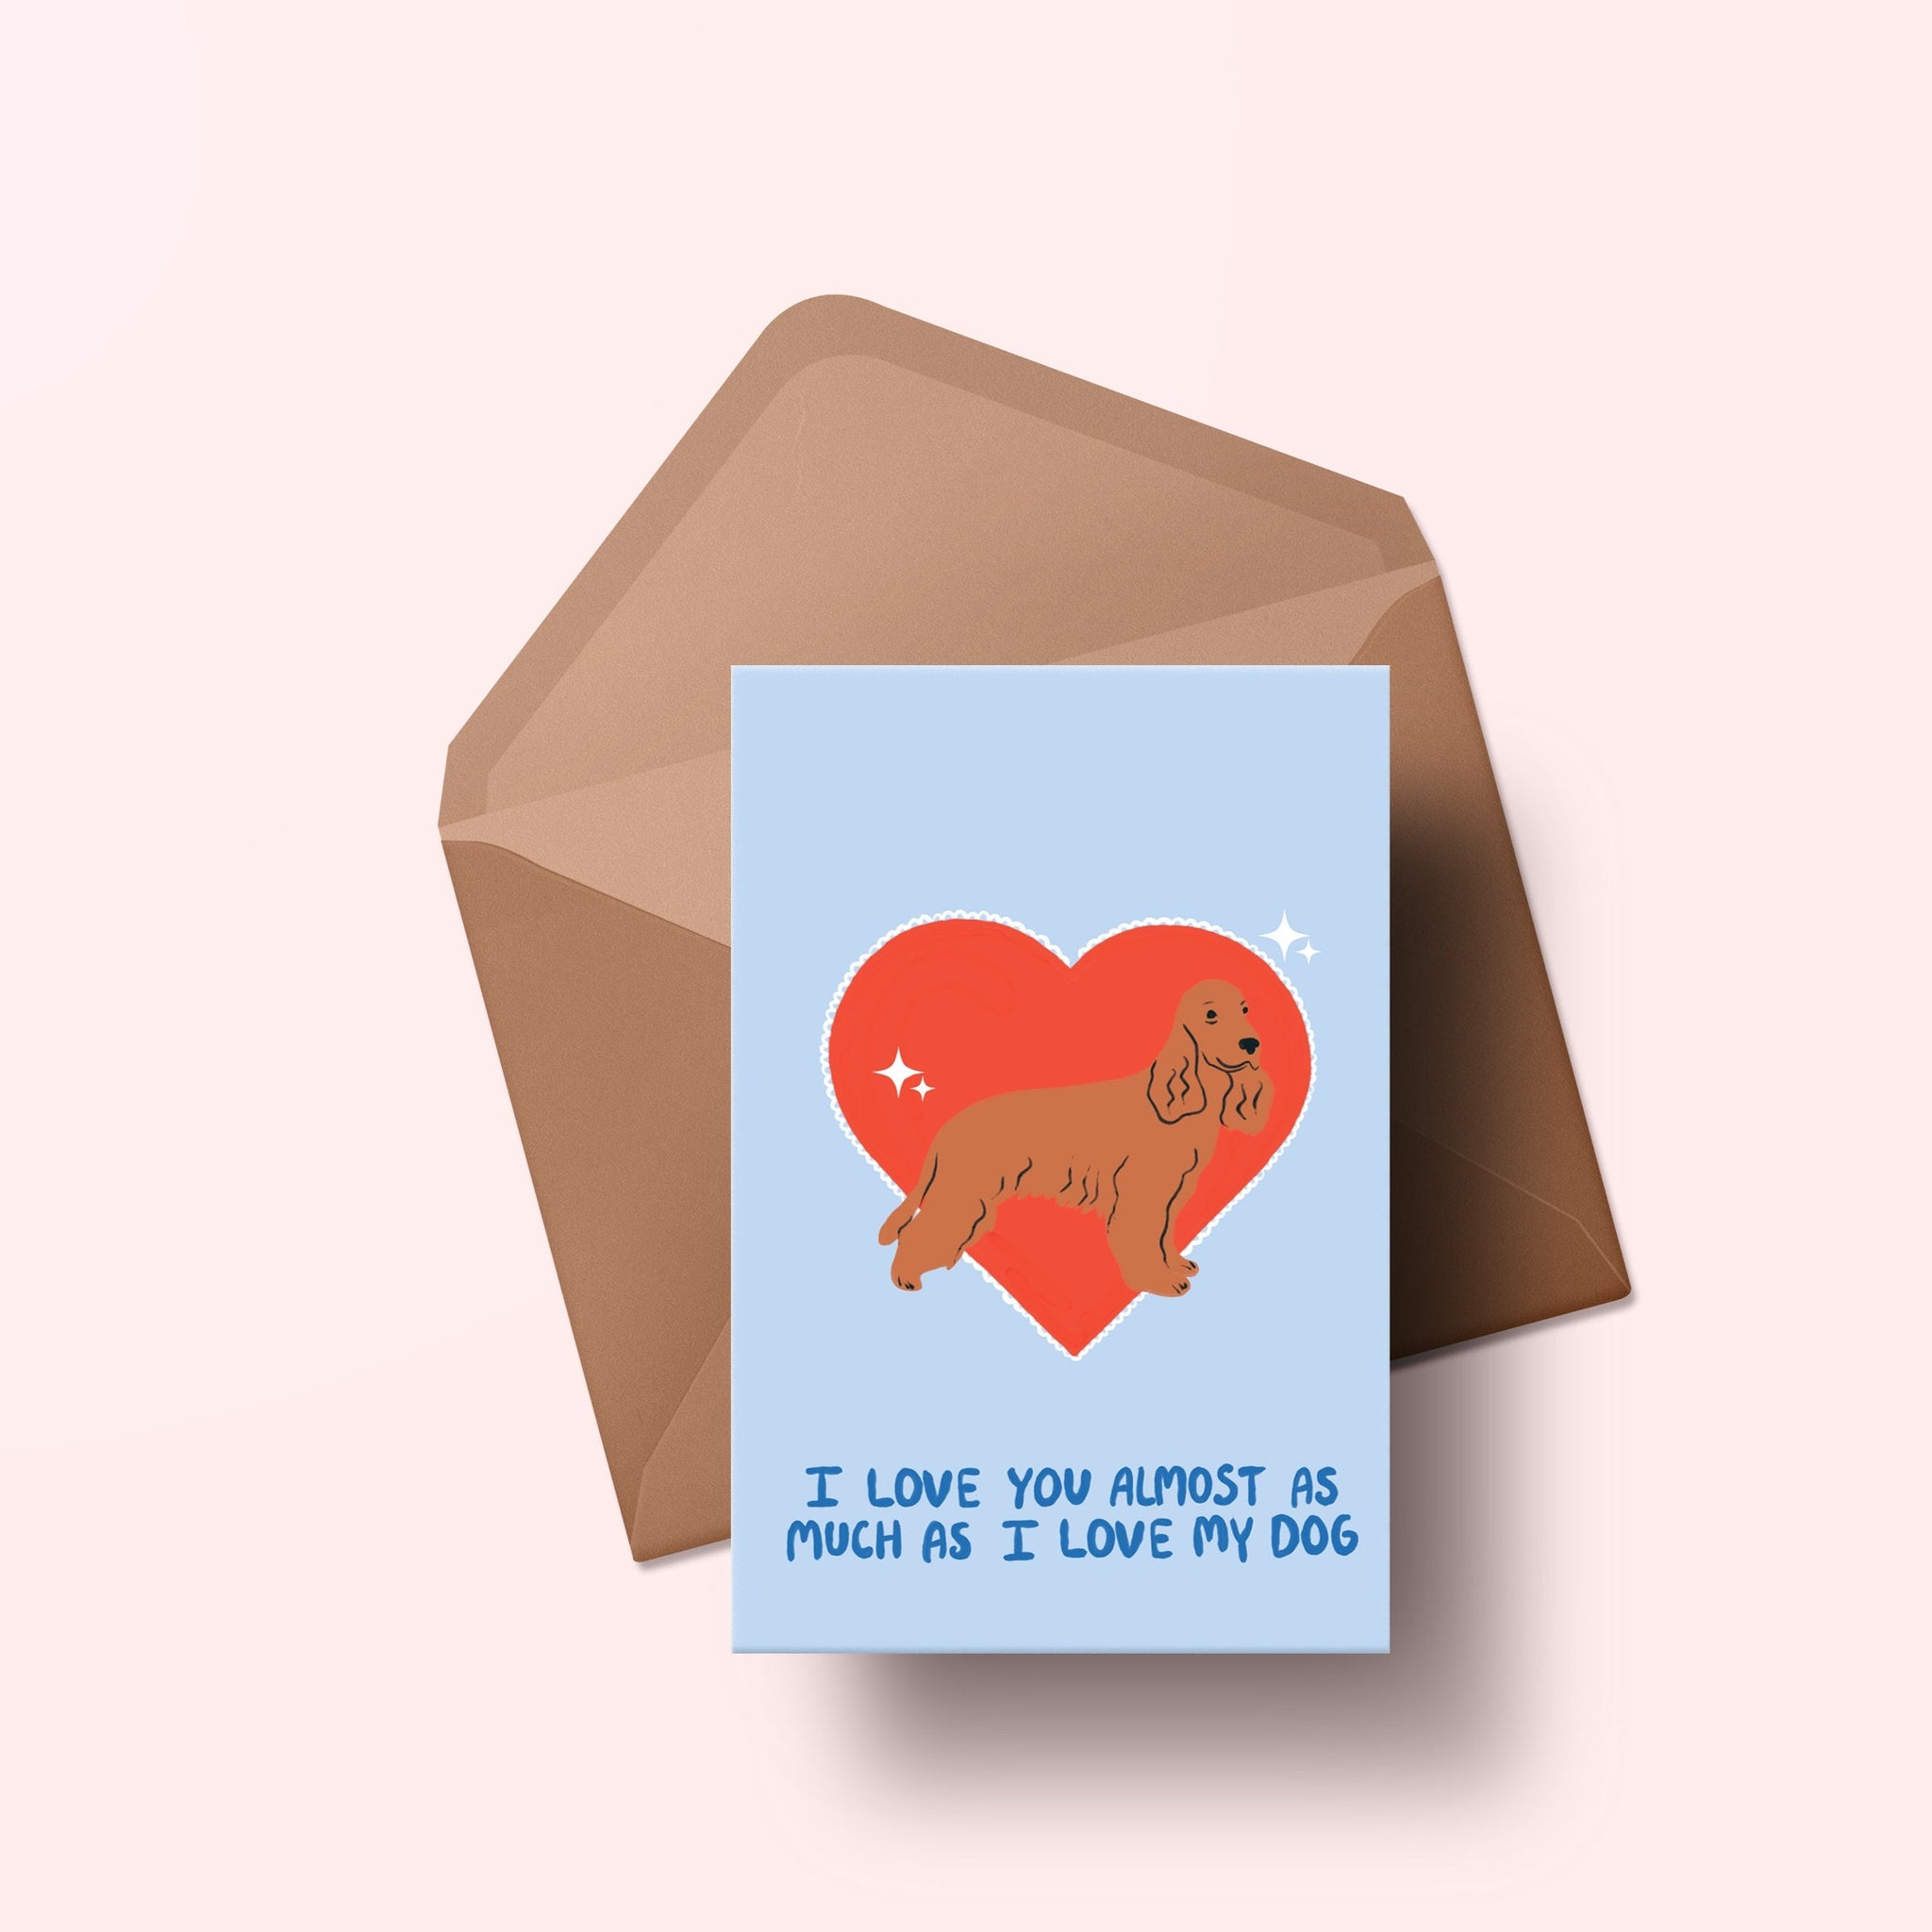 image of a greetings card featuring an illustration of a cocker spaniel with a red heart behind it. The background of the card is a light blue and beneath the heart and dog are the words I love you almost as much as my dog in handwritten lettering in a darker blue shade. Behind the card is an envelope made of a recycled kraft material.